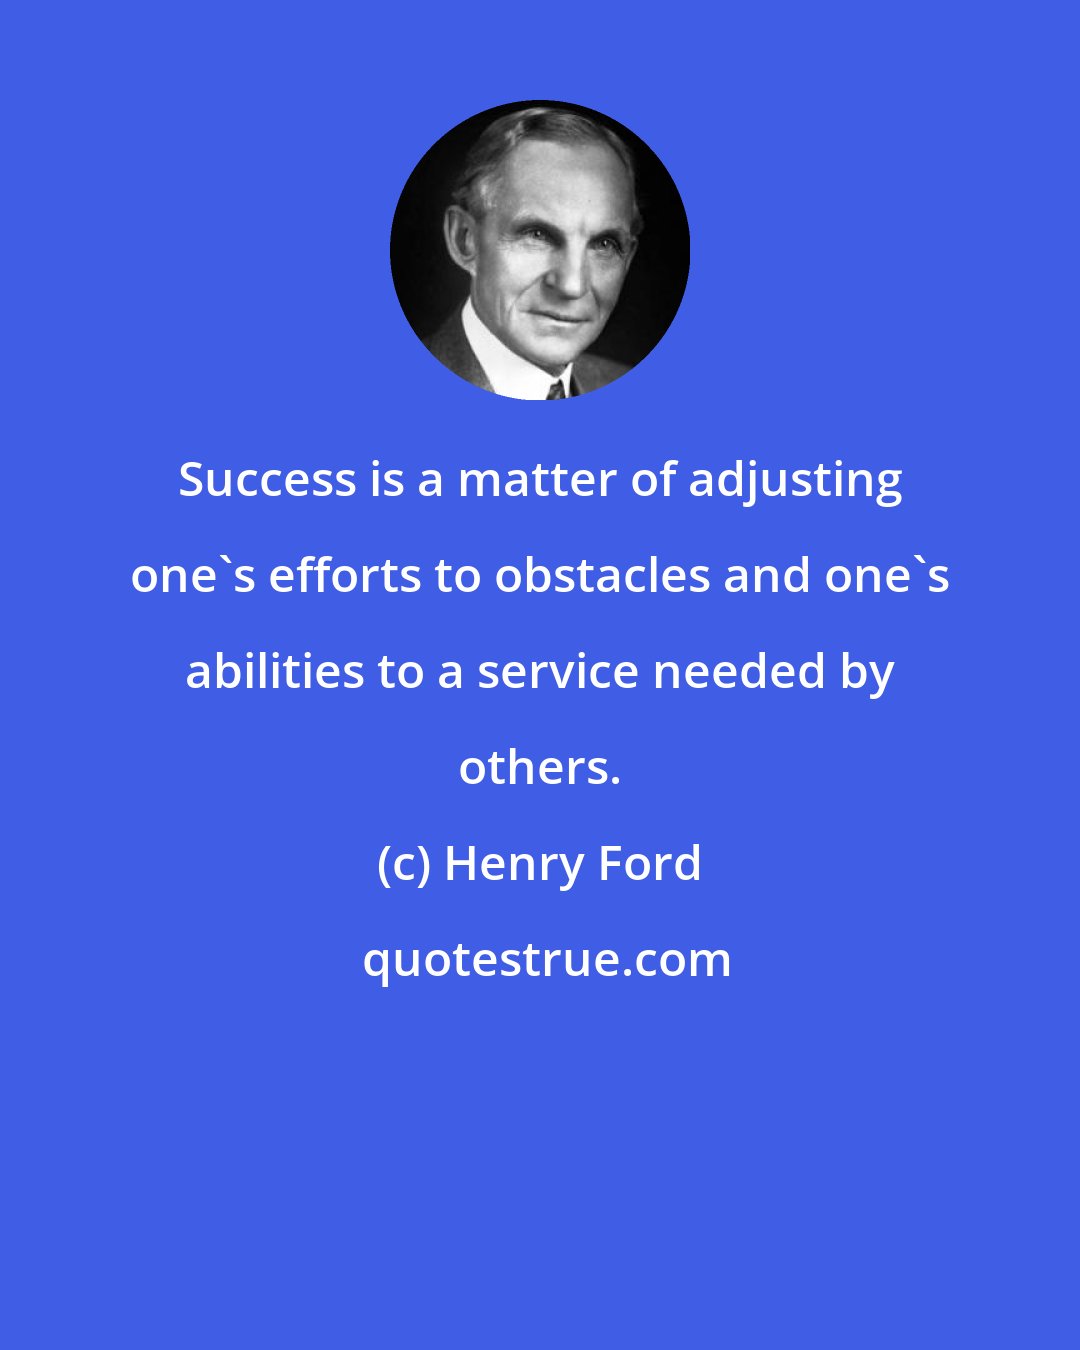 Henry Ford: Success is a matter of adjusting one's efforts to obstacles and one's abilities to a service needed by others.